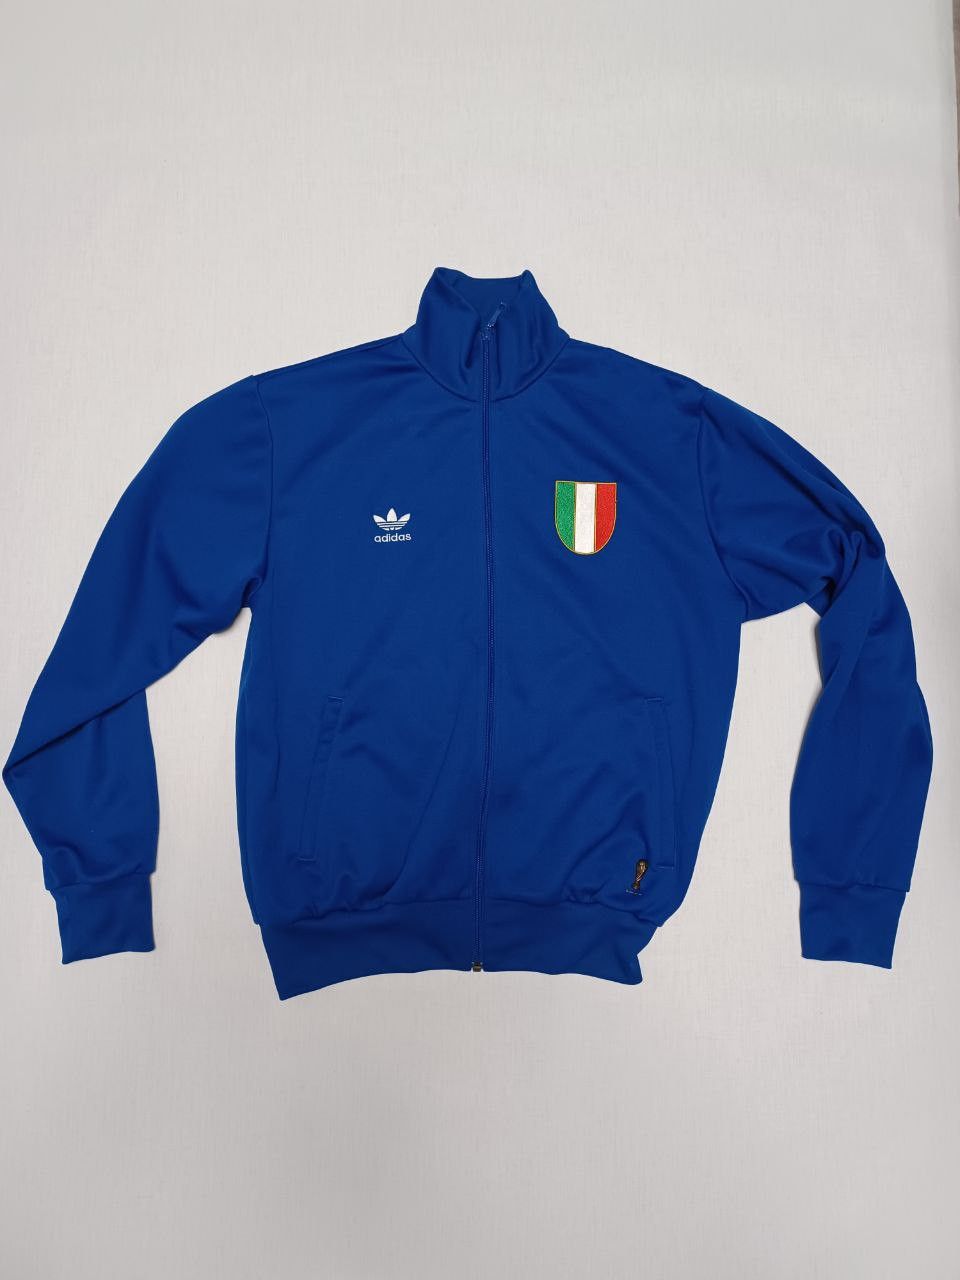 Pre-owned Adidas X Fifa World Cup Adidas Vintage Italy Team Tracking Jacket In Blue